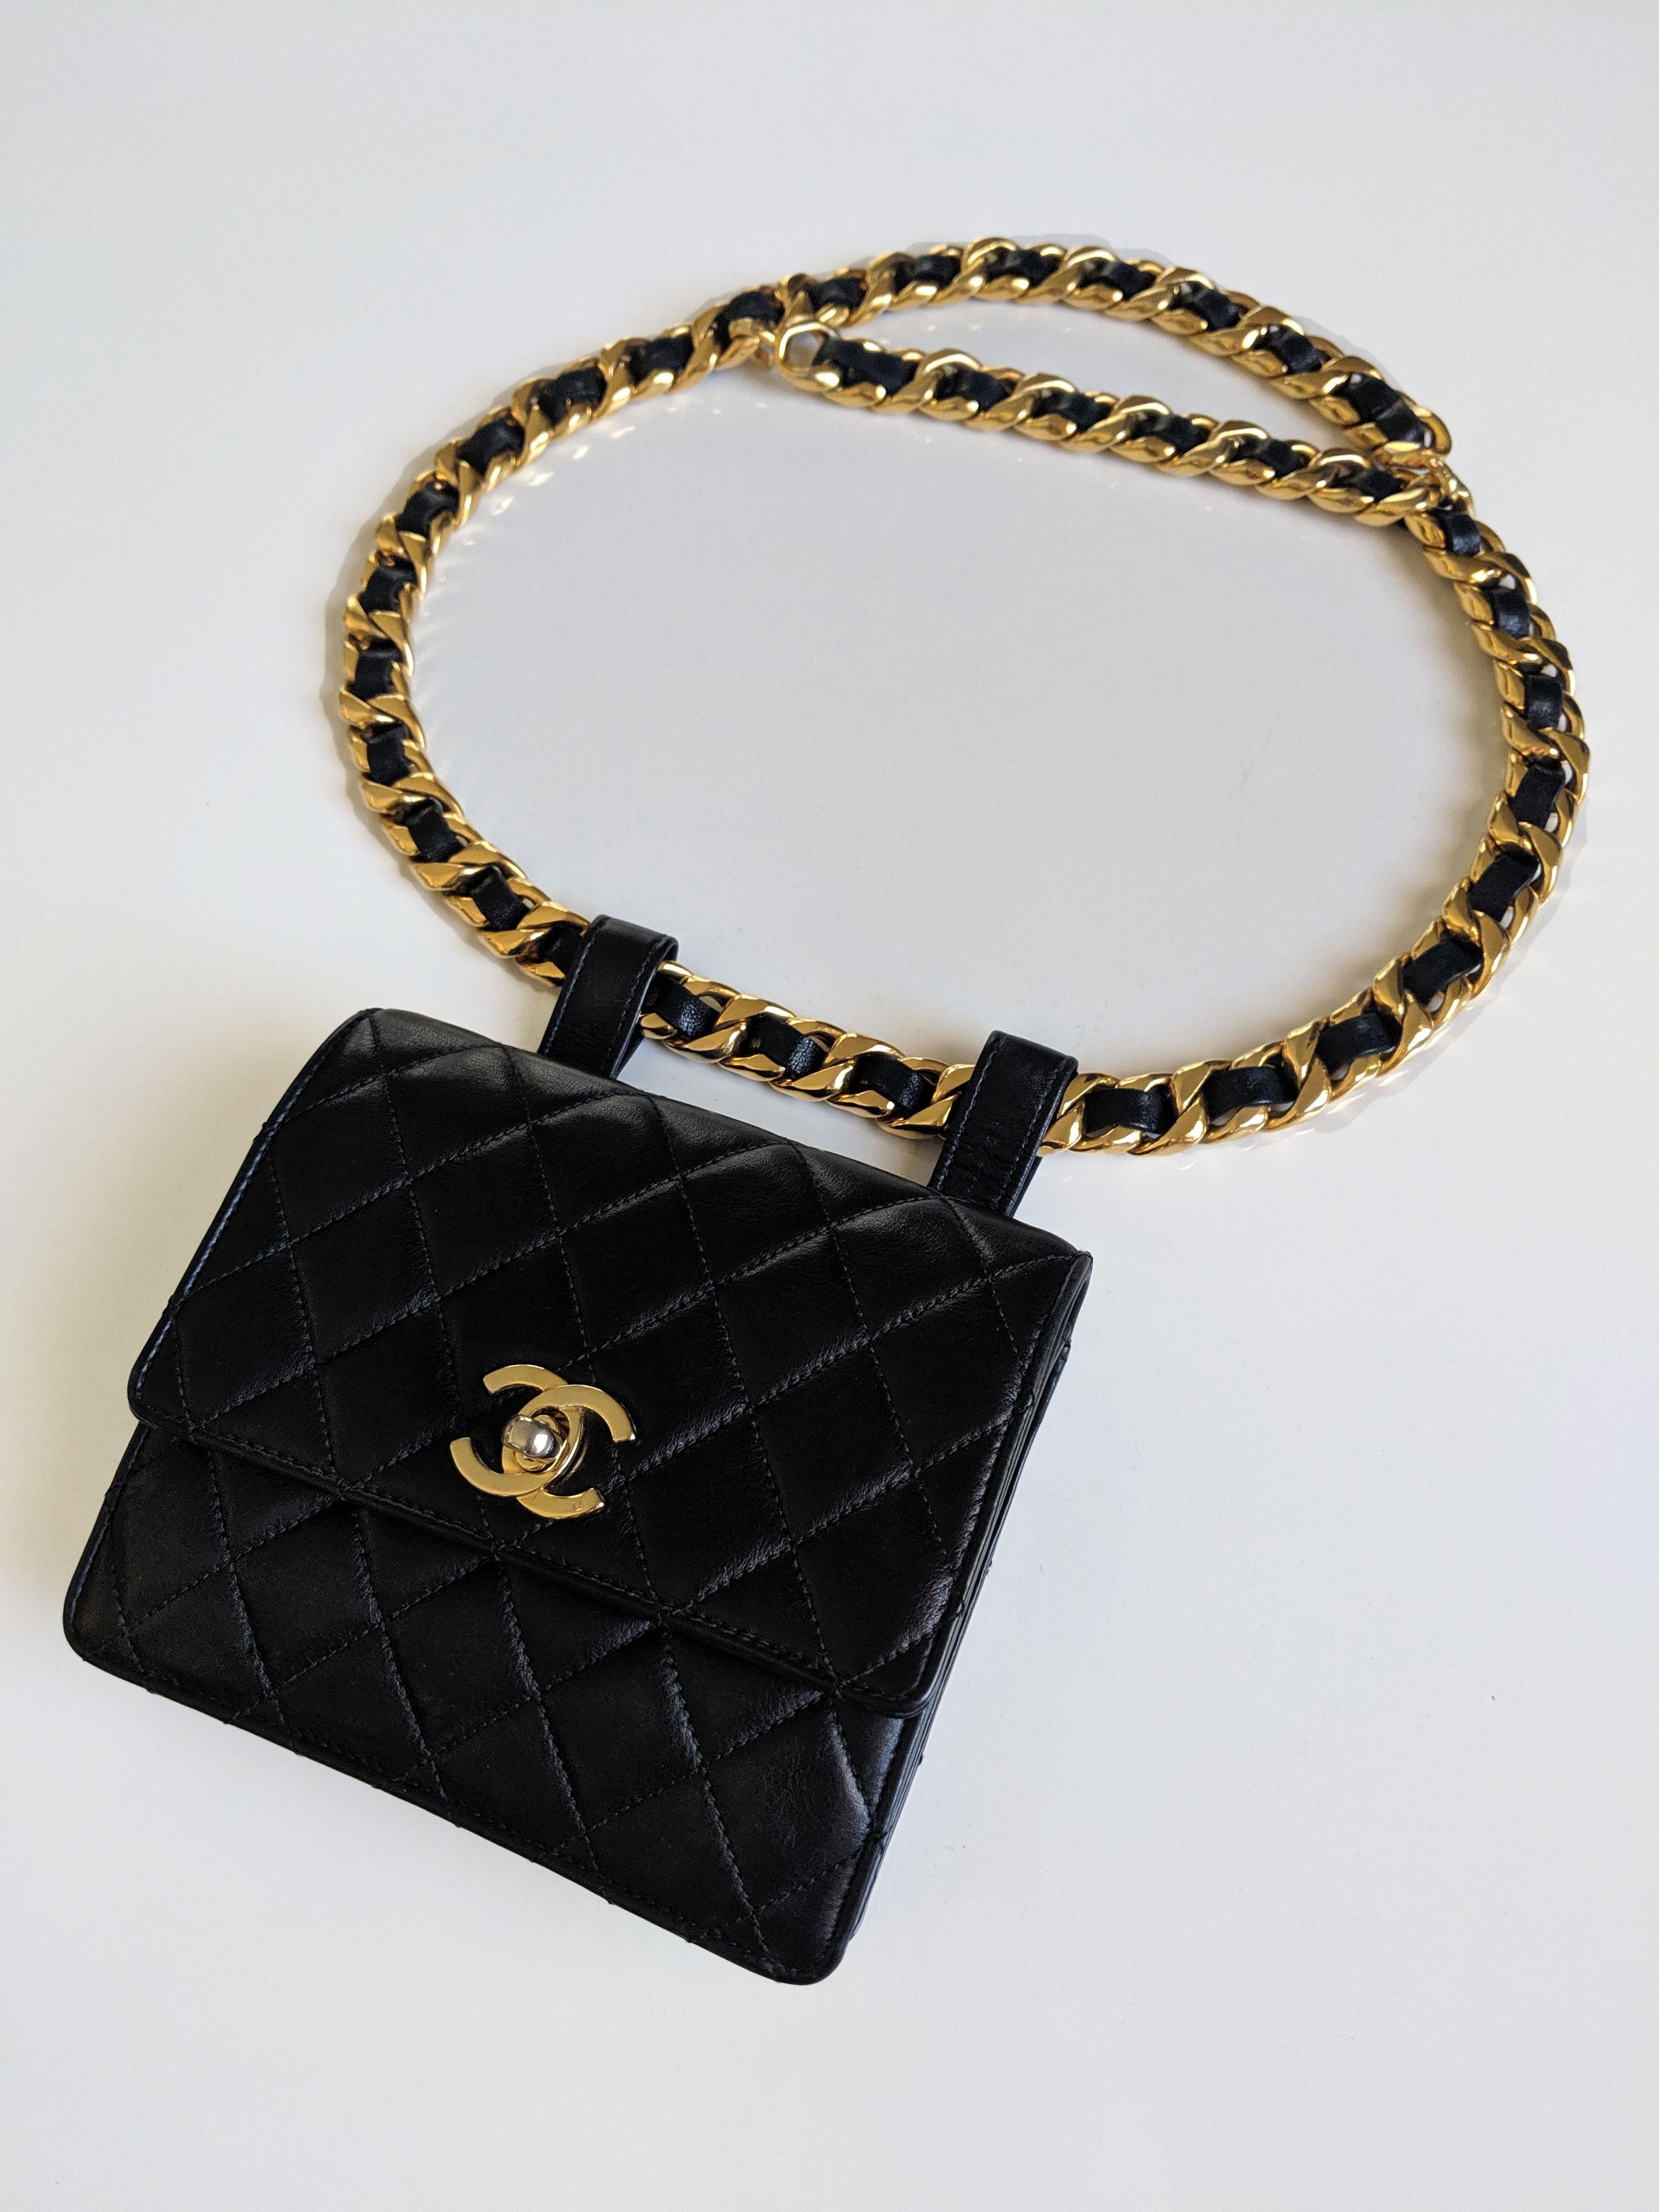 Chanel 1991 Ultra Rare Vintage Waist Belt Bag Fanny Pack In Good Condition For Sale In Miami, FL